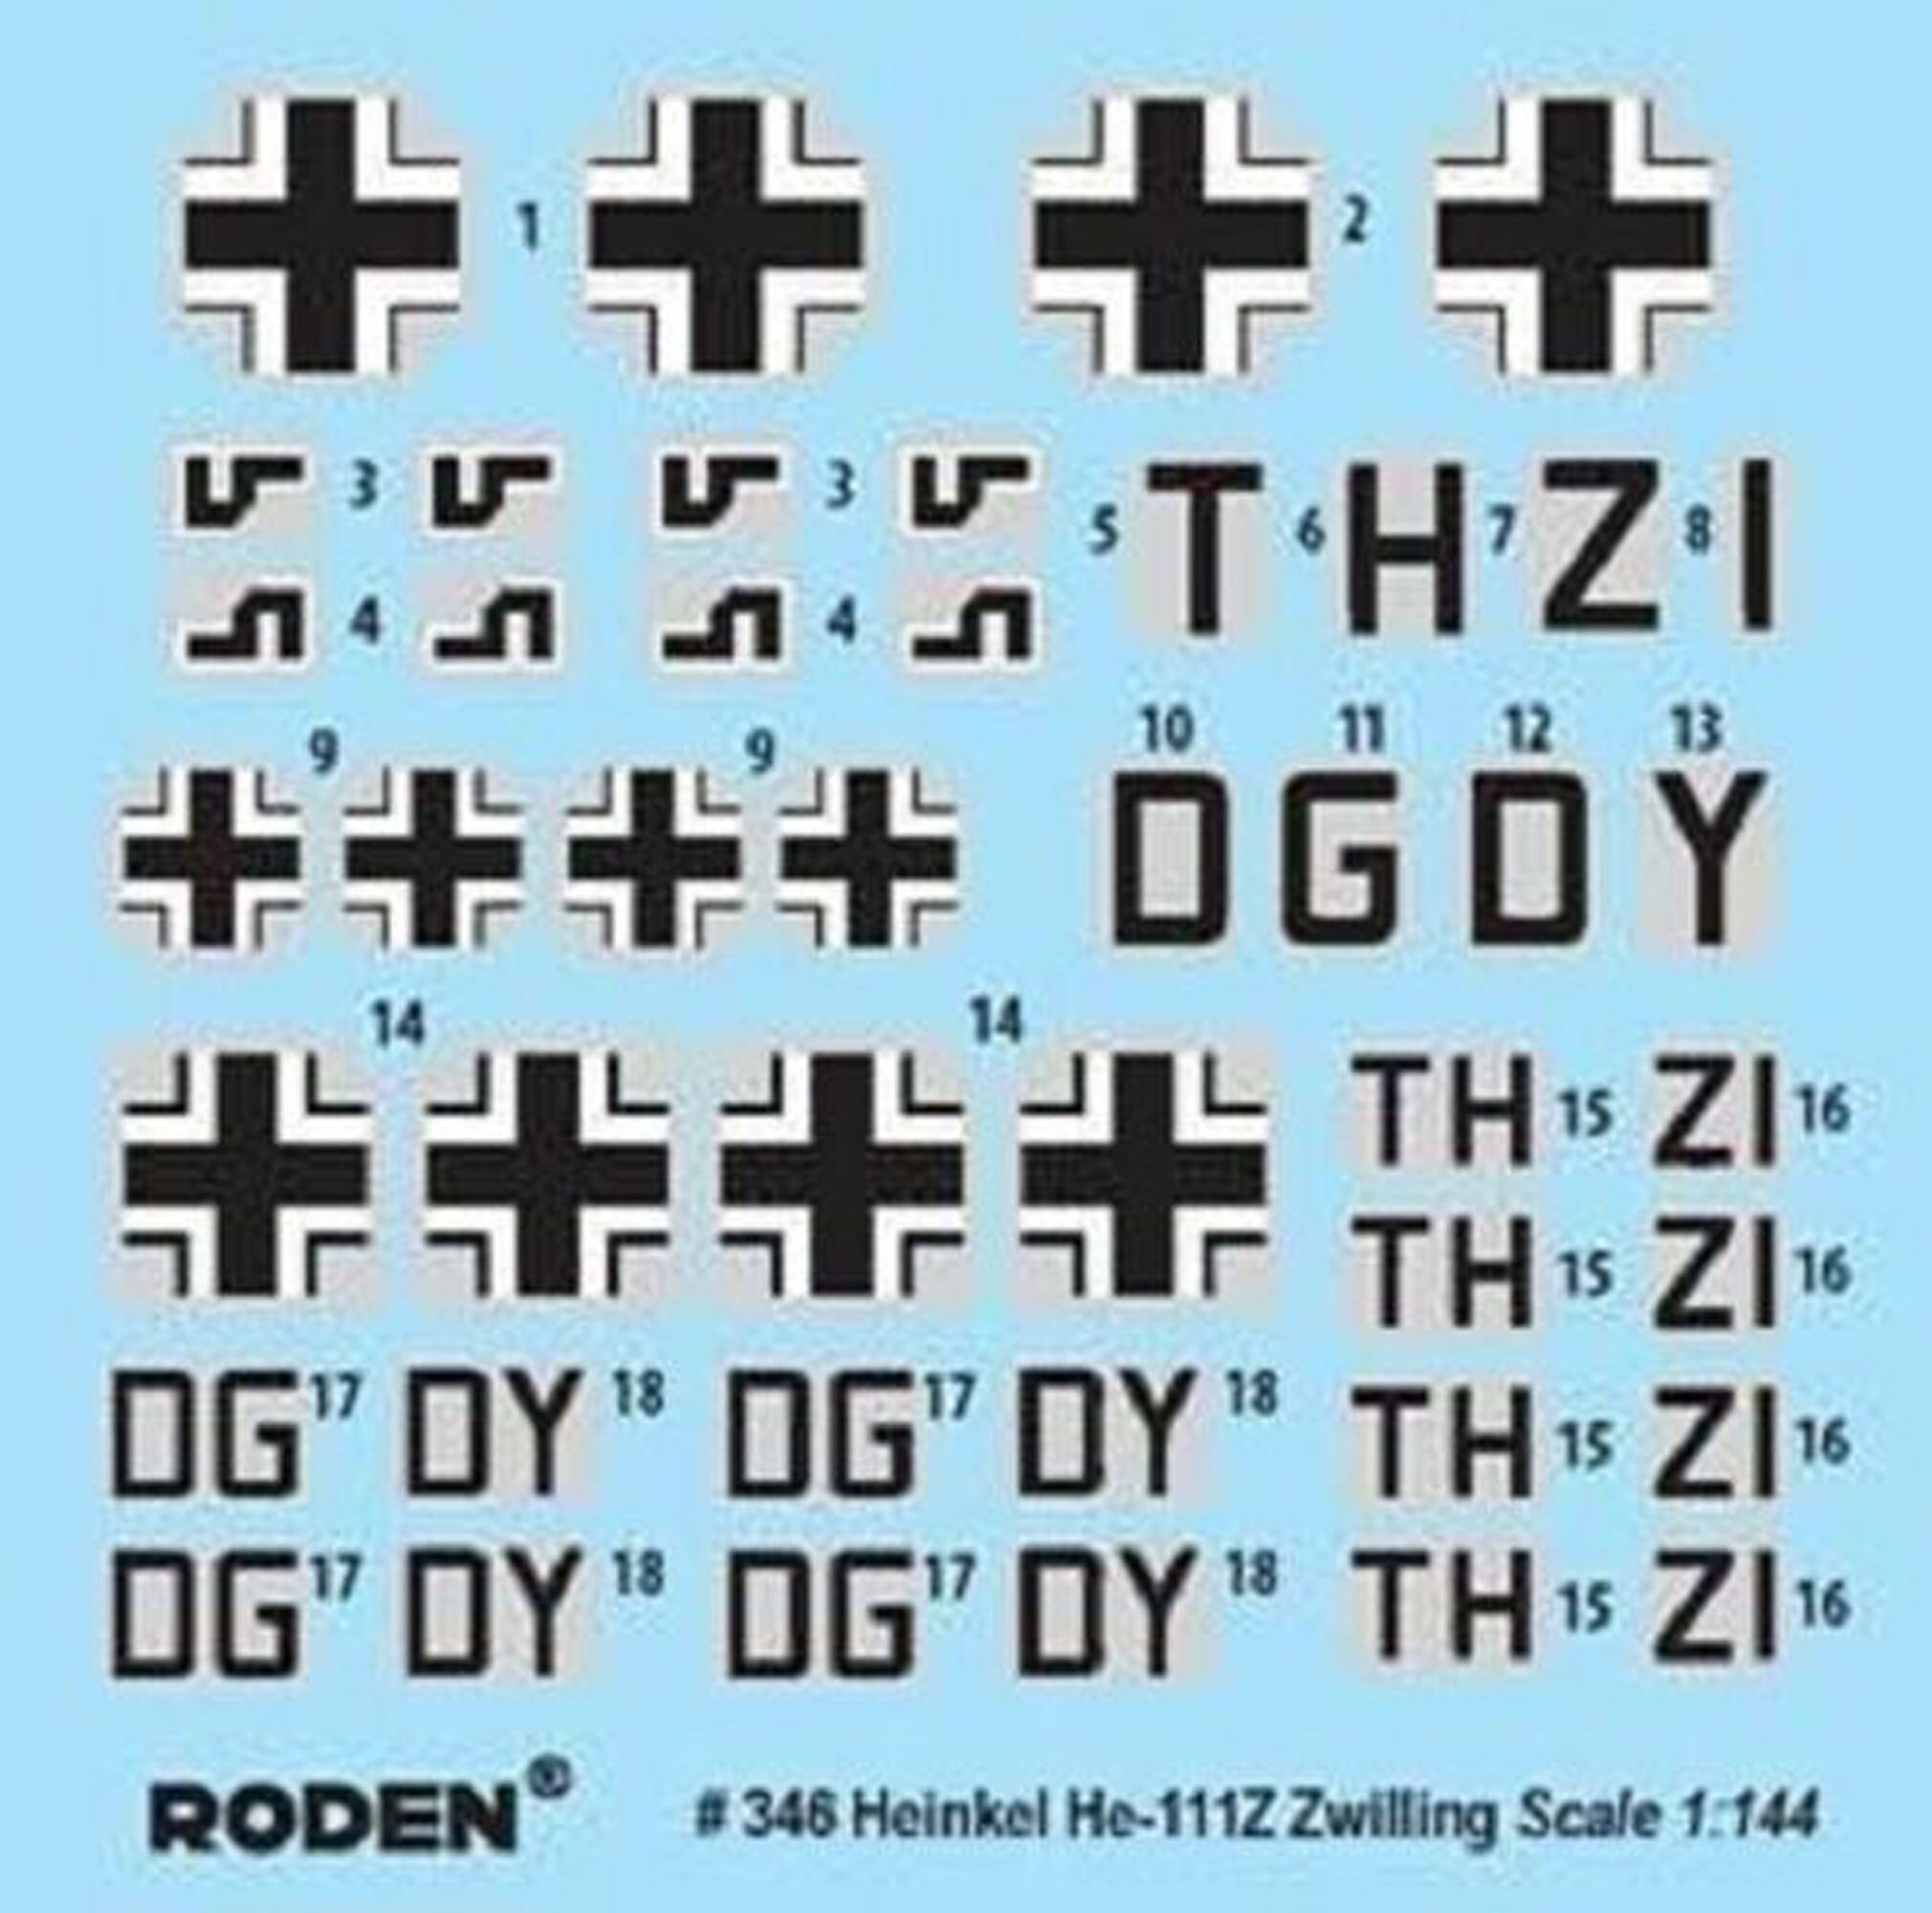 Roden 346 Aircraft Heinkel He 111Z-1 Zwilling Scale Plastic Model Kit 1/144